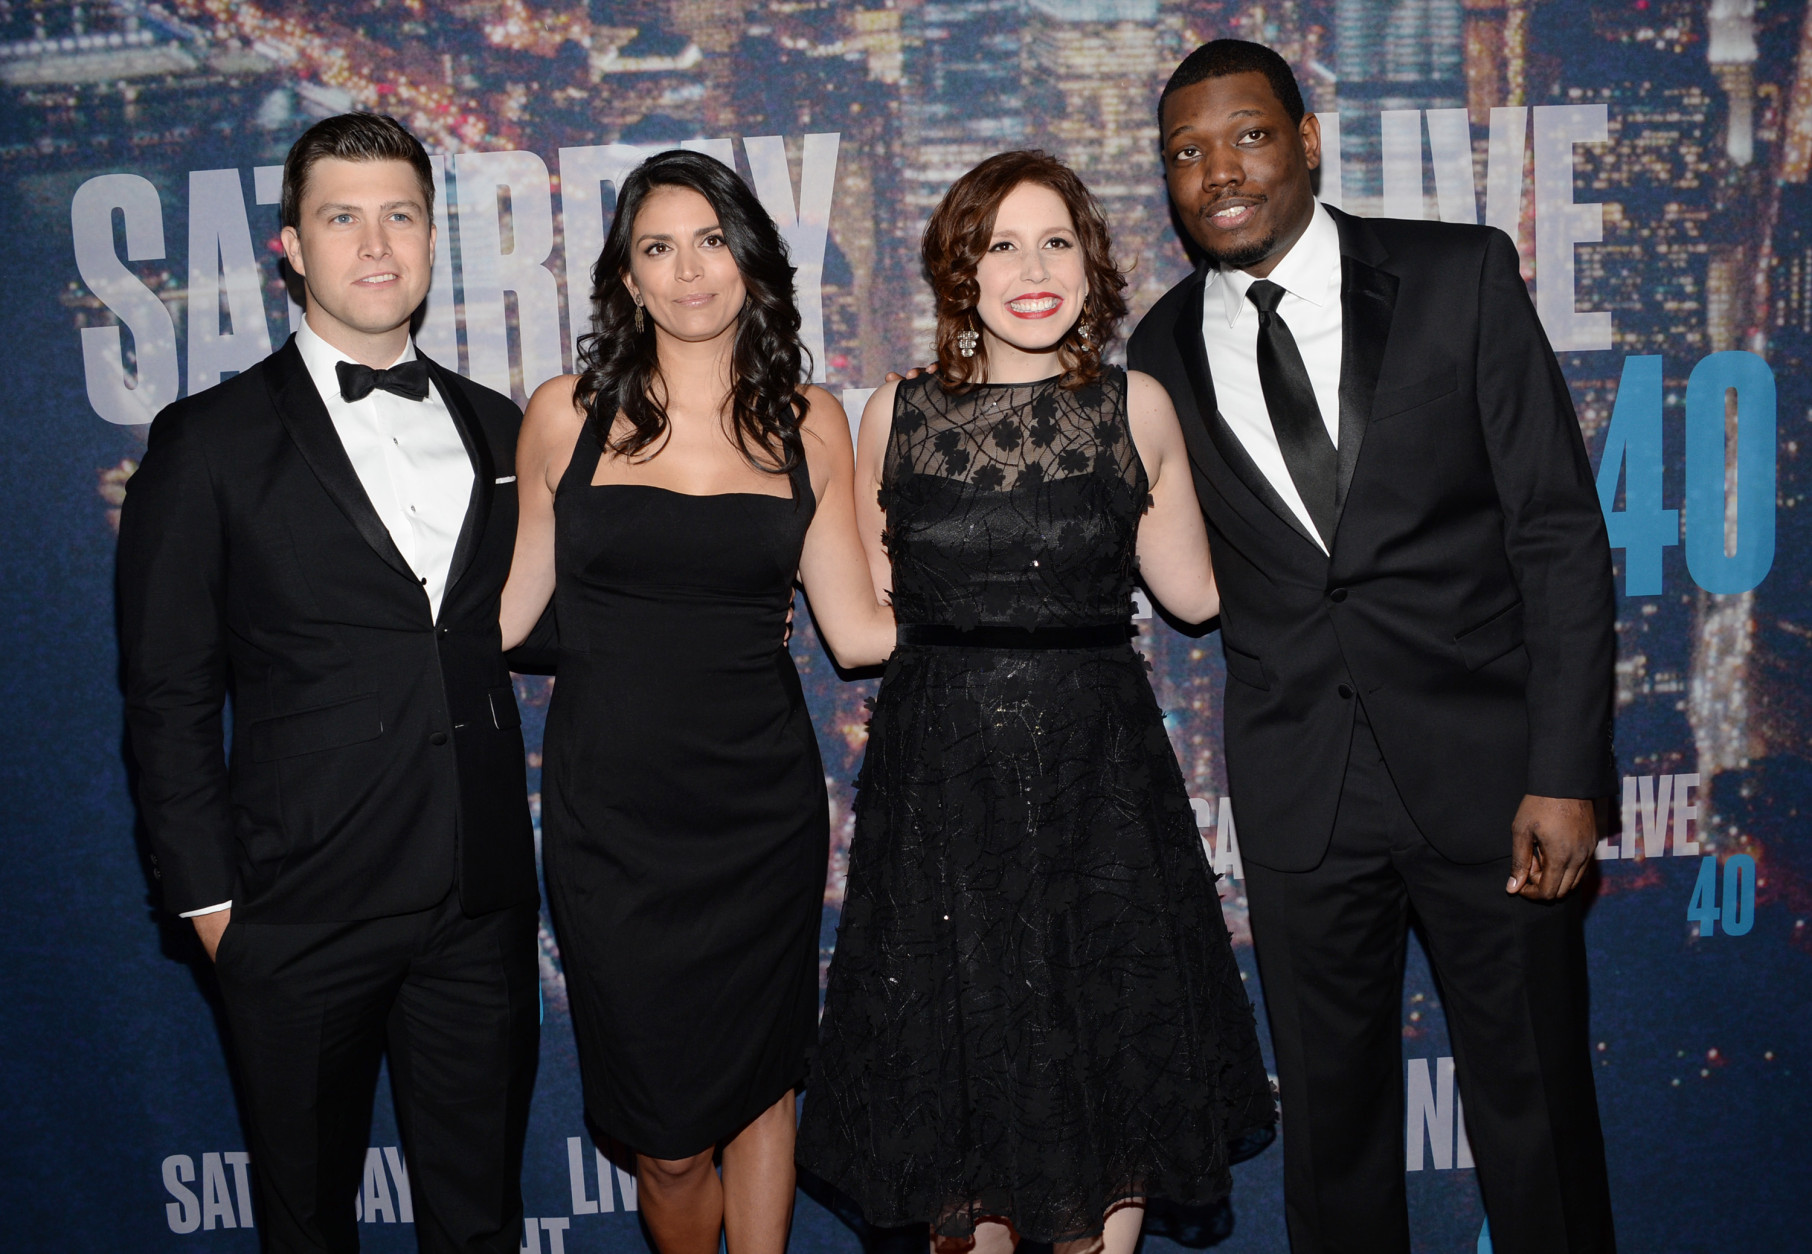 Colin Jost, from left, Cecily Strong, Vanessa Bayer and Michael Che arrive at the Saturday Night Live 40th Anniversary Special at Rockefeller Plaza on Sunday, Feb. 15, 2015, in New York. (Photo by Evan Agostini/Invision/AP)